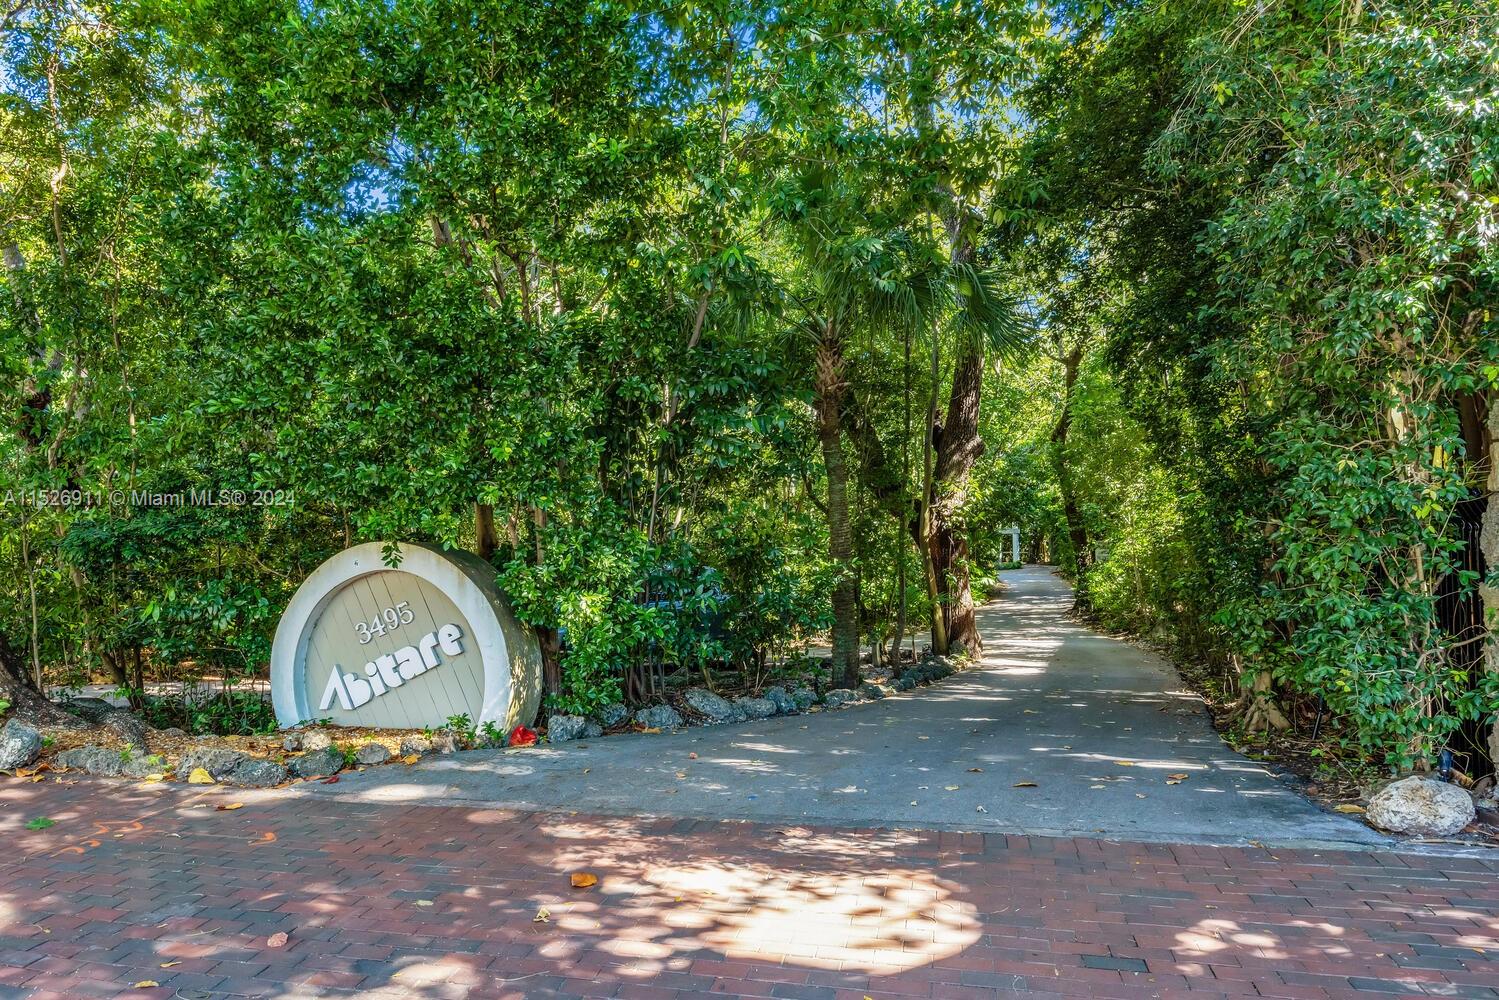 Magical townhome in Abitare, an ultra-private guard-gated community - secluded in a natural hardwood hammock on the shores of Biscayne Bay. Just steps from the historic Coconut Grove village, with it’s galleries, bouitques & cafes. Enter via a winding tree-canopied road to this coastal-style, two-story residence. 2BR/2.5BA. Light-filled living spaces w/25’ wood-beamed ceilings, soaring skylights, fireplace, updated kitchen & wood-plank style tile flooring. 2nd level offers open loft/family room/office + 2 oversized bedrooms w/ high vaulted ceilings & en-suite baths. Enjoy bay breezes from a charming screened porch & rooftop terrace overlooking the tree-tops. The community offers a tropical pool & private dock w/ slips offering direct ocean access (35x25) available to each resident.